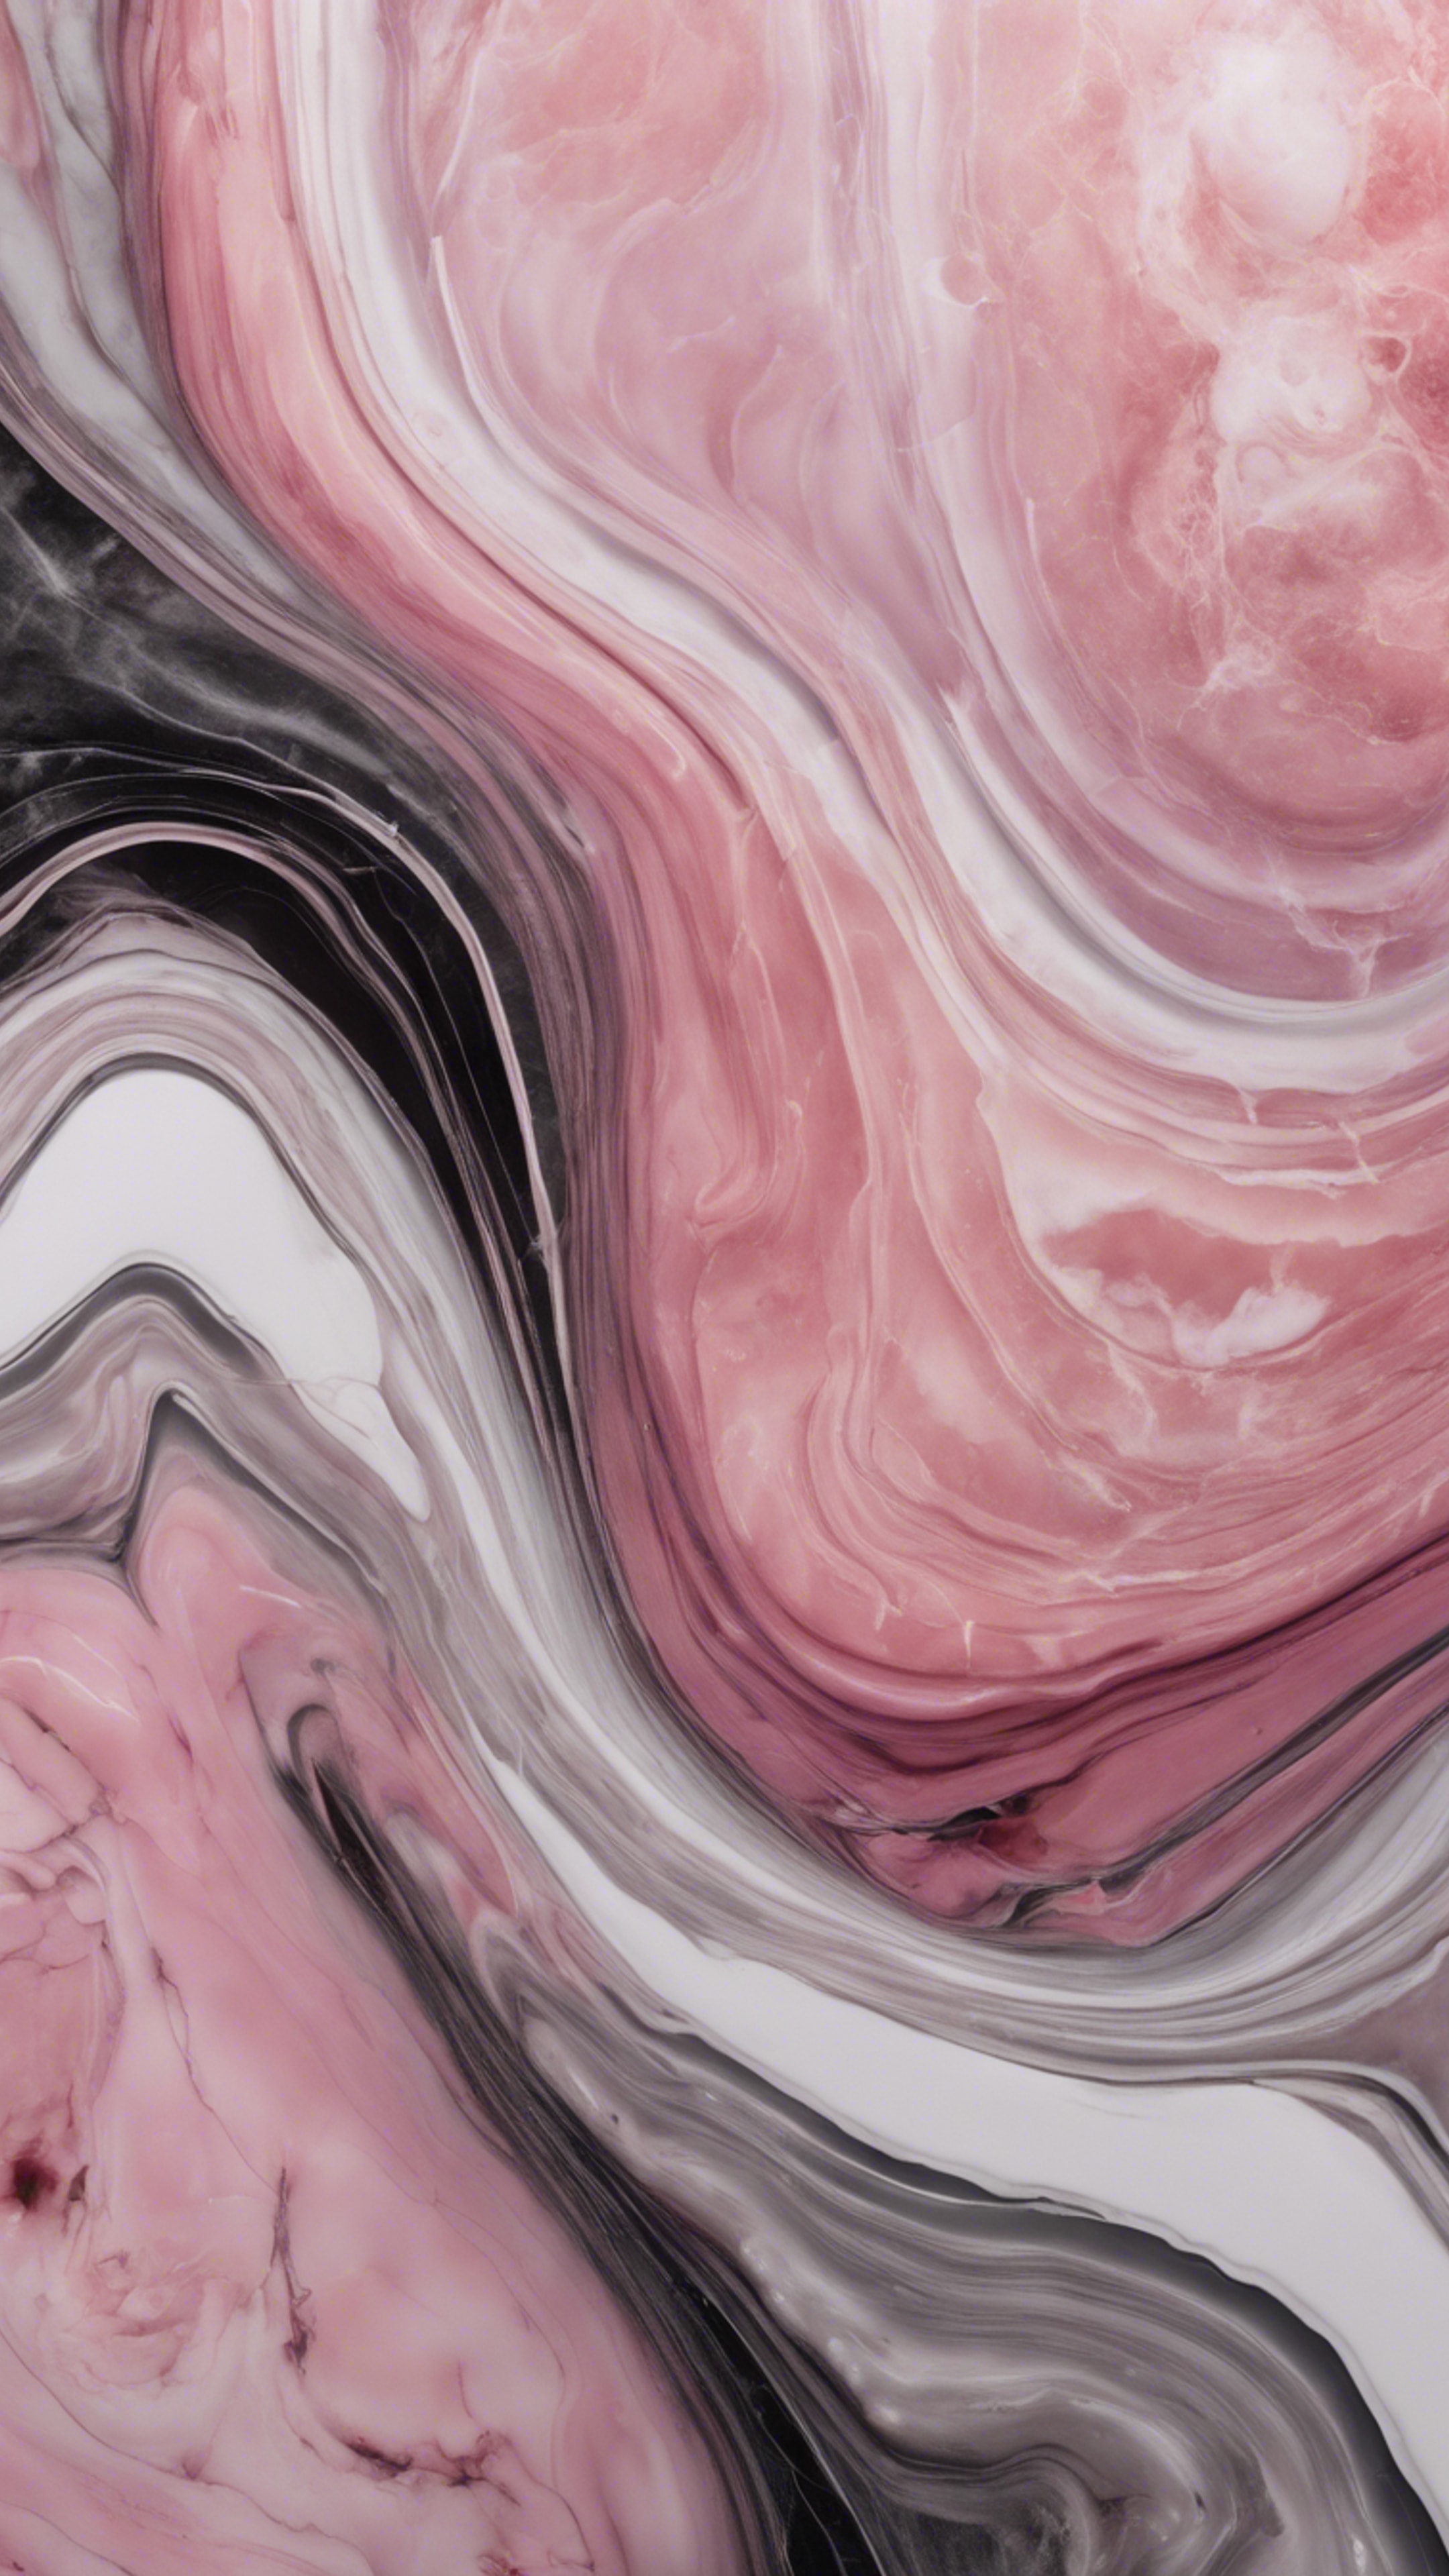 An abstract representation of pink marble, incorporating waves of deep pinks, soft whites, and dark greys. Ფონი[5ac081f457bf4dc8ac1f]